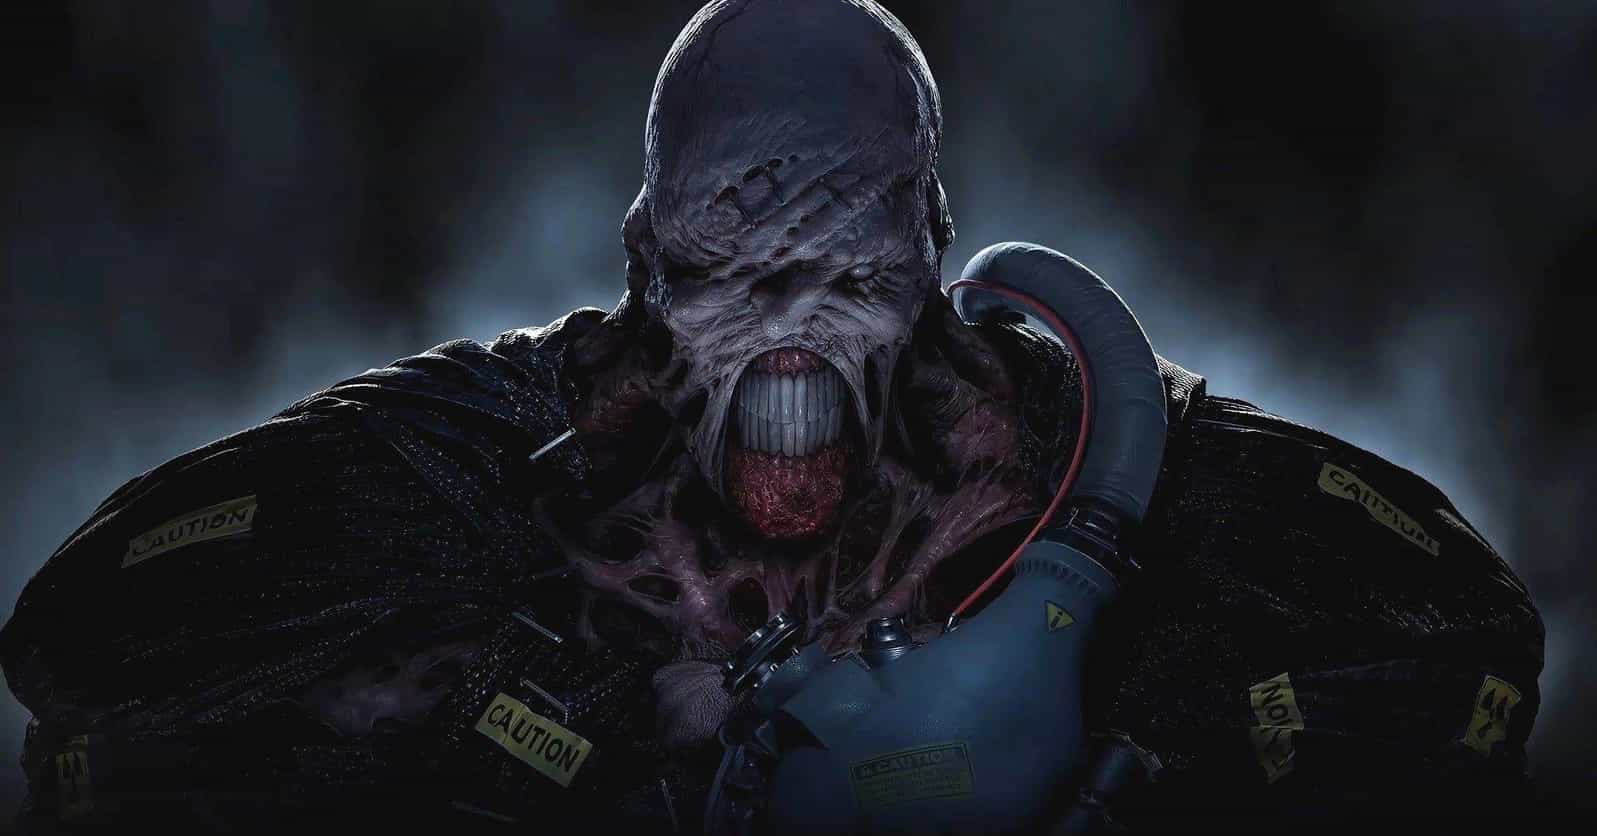 The Scariest Bosses In The 'Resident Evil' Series, Ranked